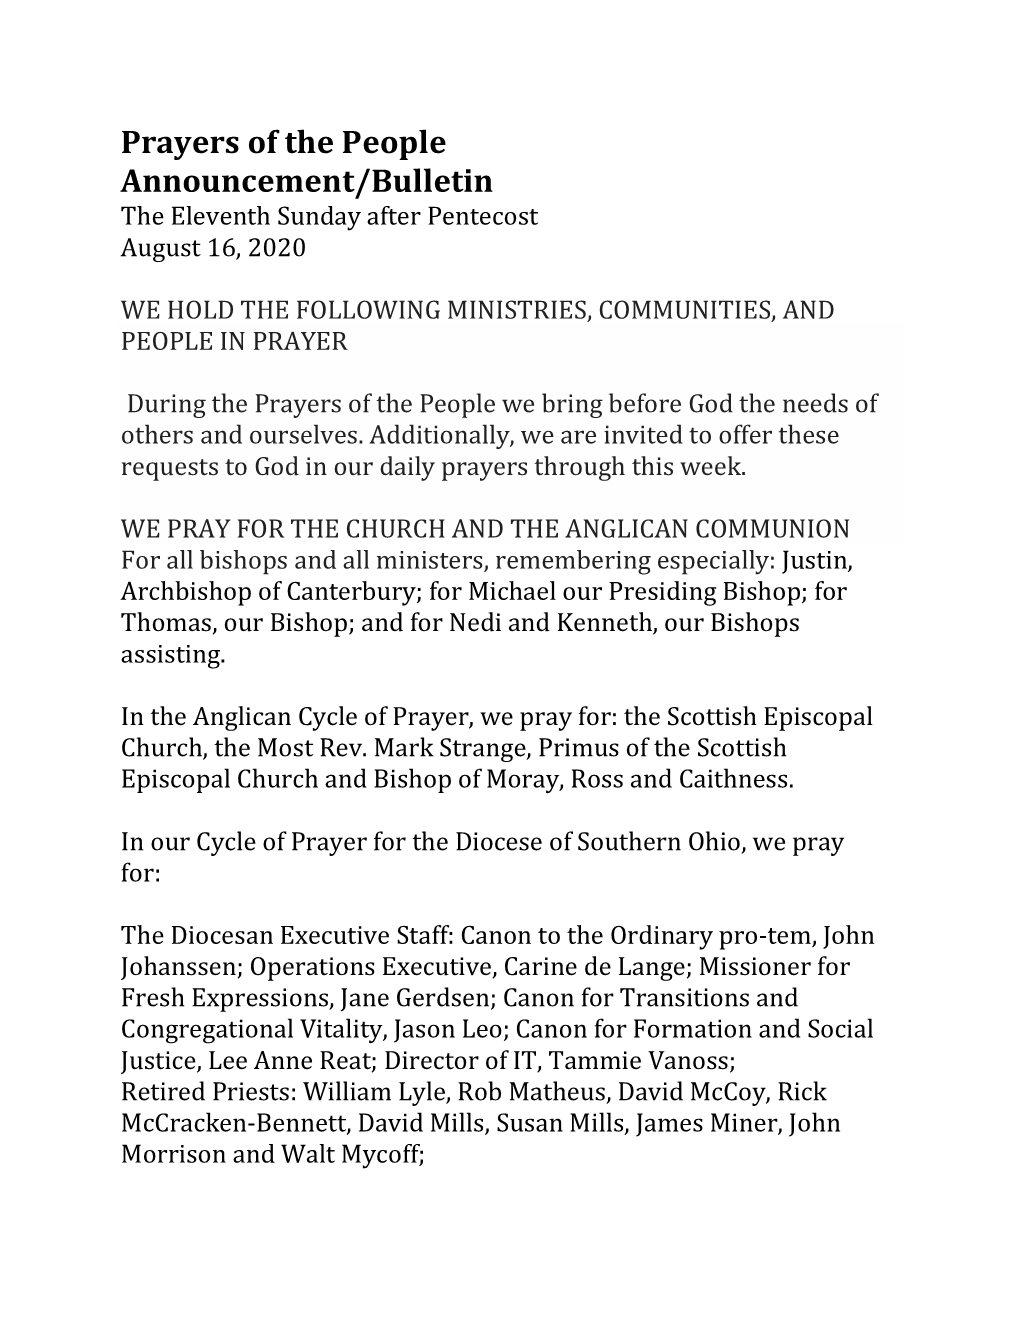 Prayers of the People Announcement/Bulletin